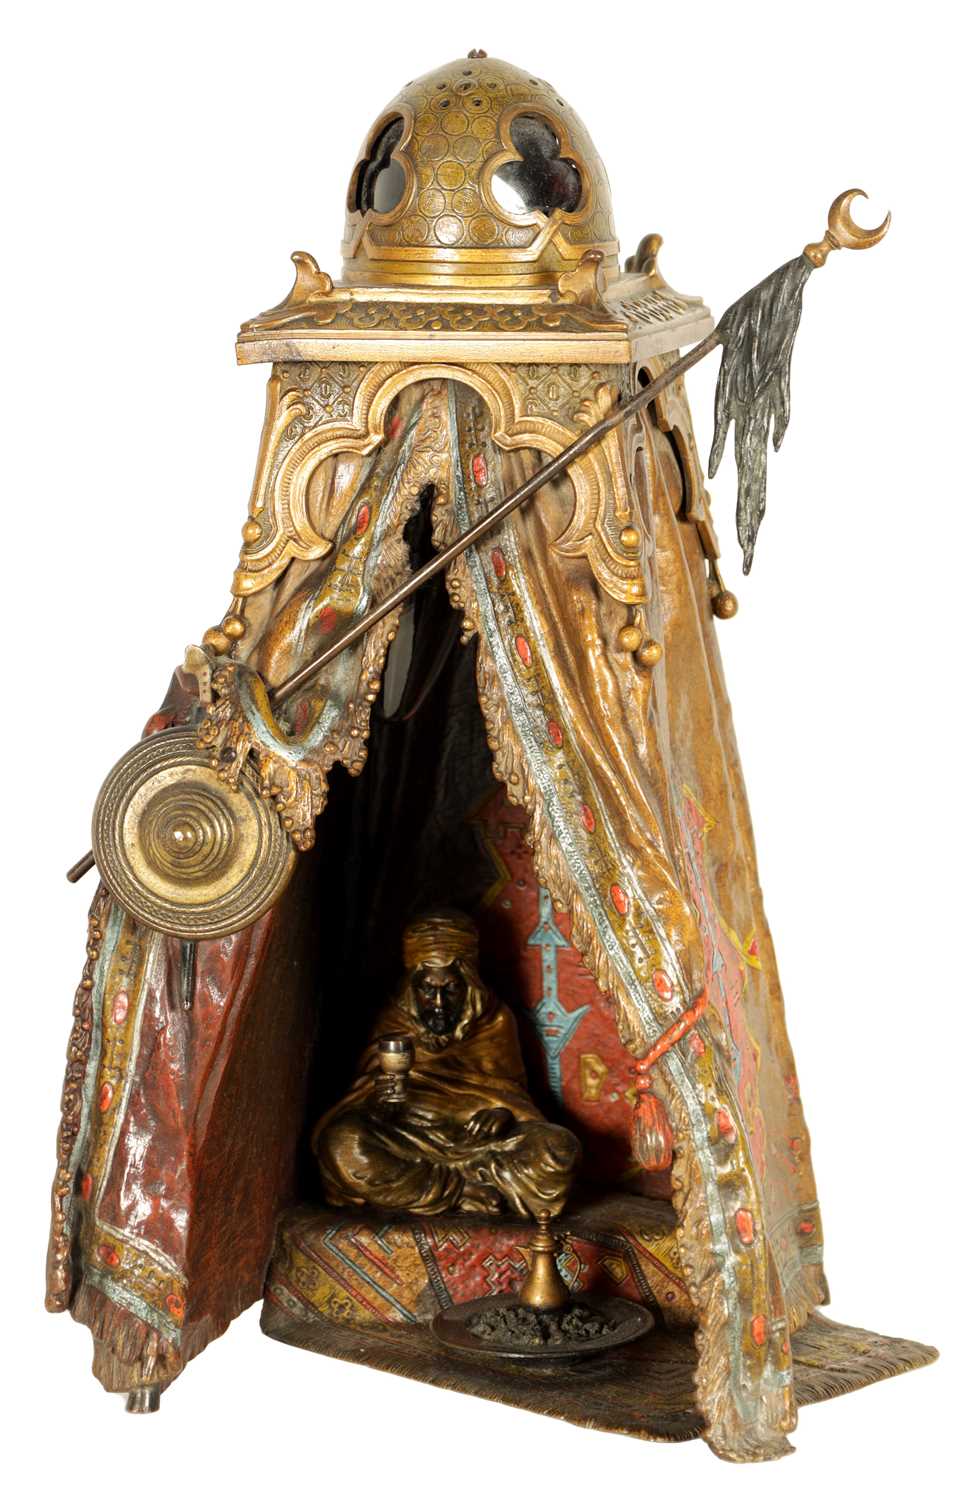 FRANZ BERGMAN. AN EARLY 20TH CENTURY AUSTRIAN COLD-PAINTED BRONZE ORIENTALIST TABLE LAMP